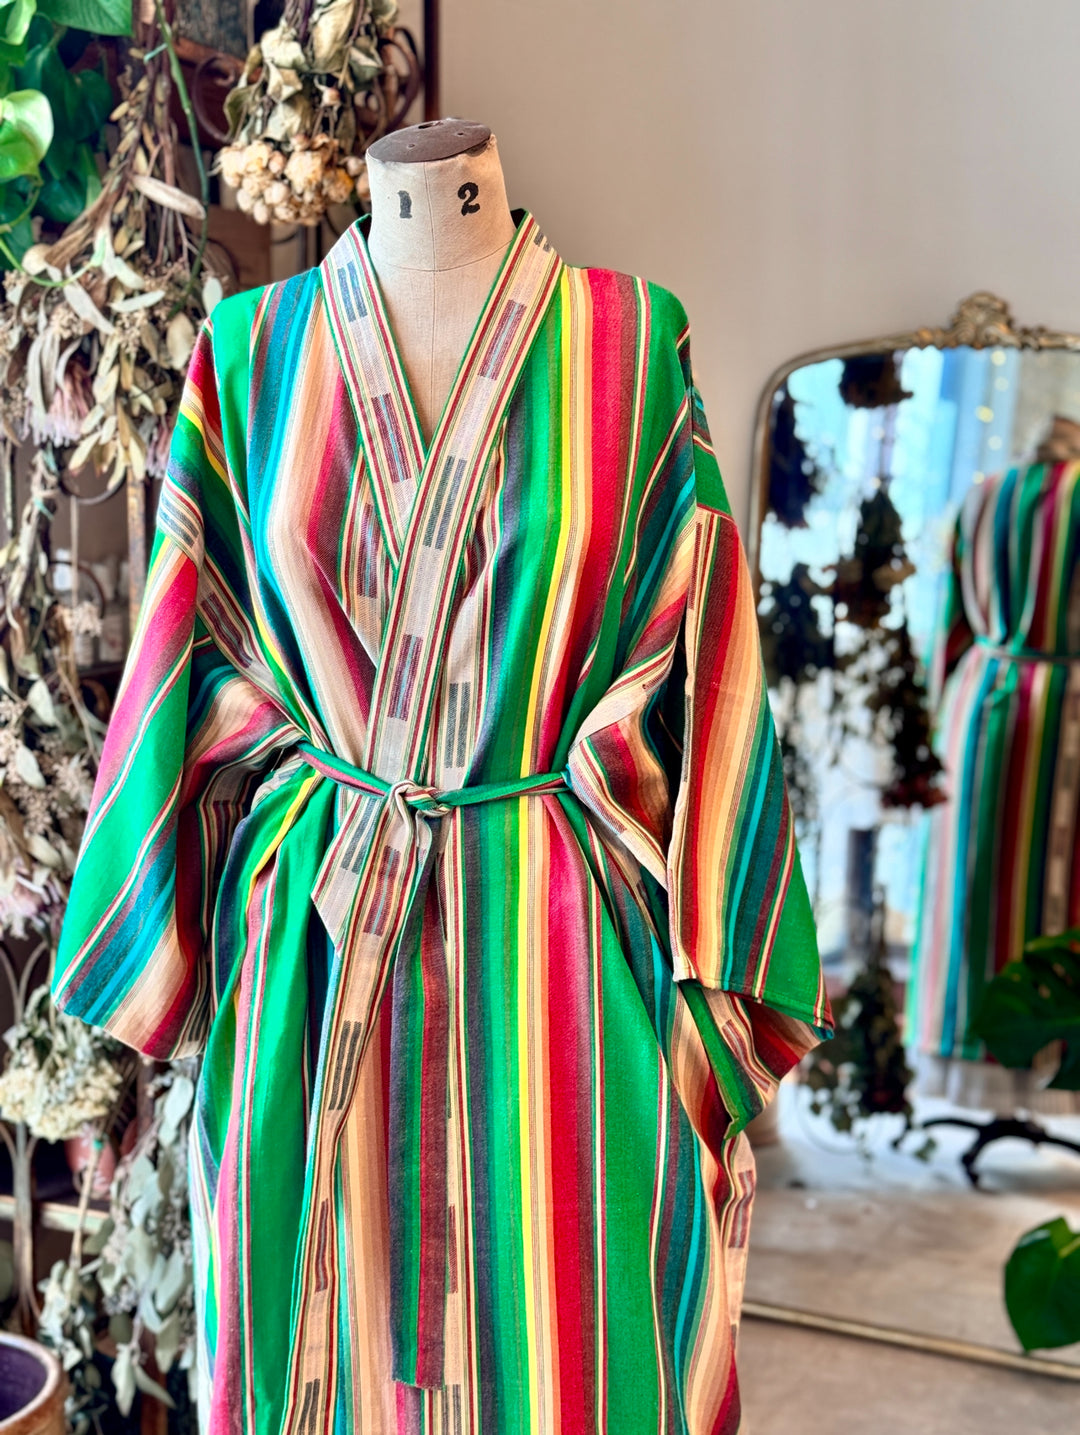 green ikat striped cotton robe on a dress form with a mirror and dried flower bundles in the background